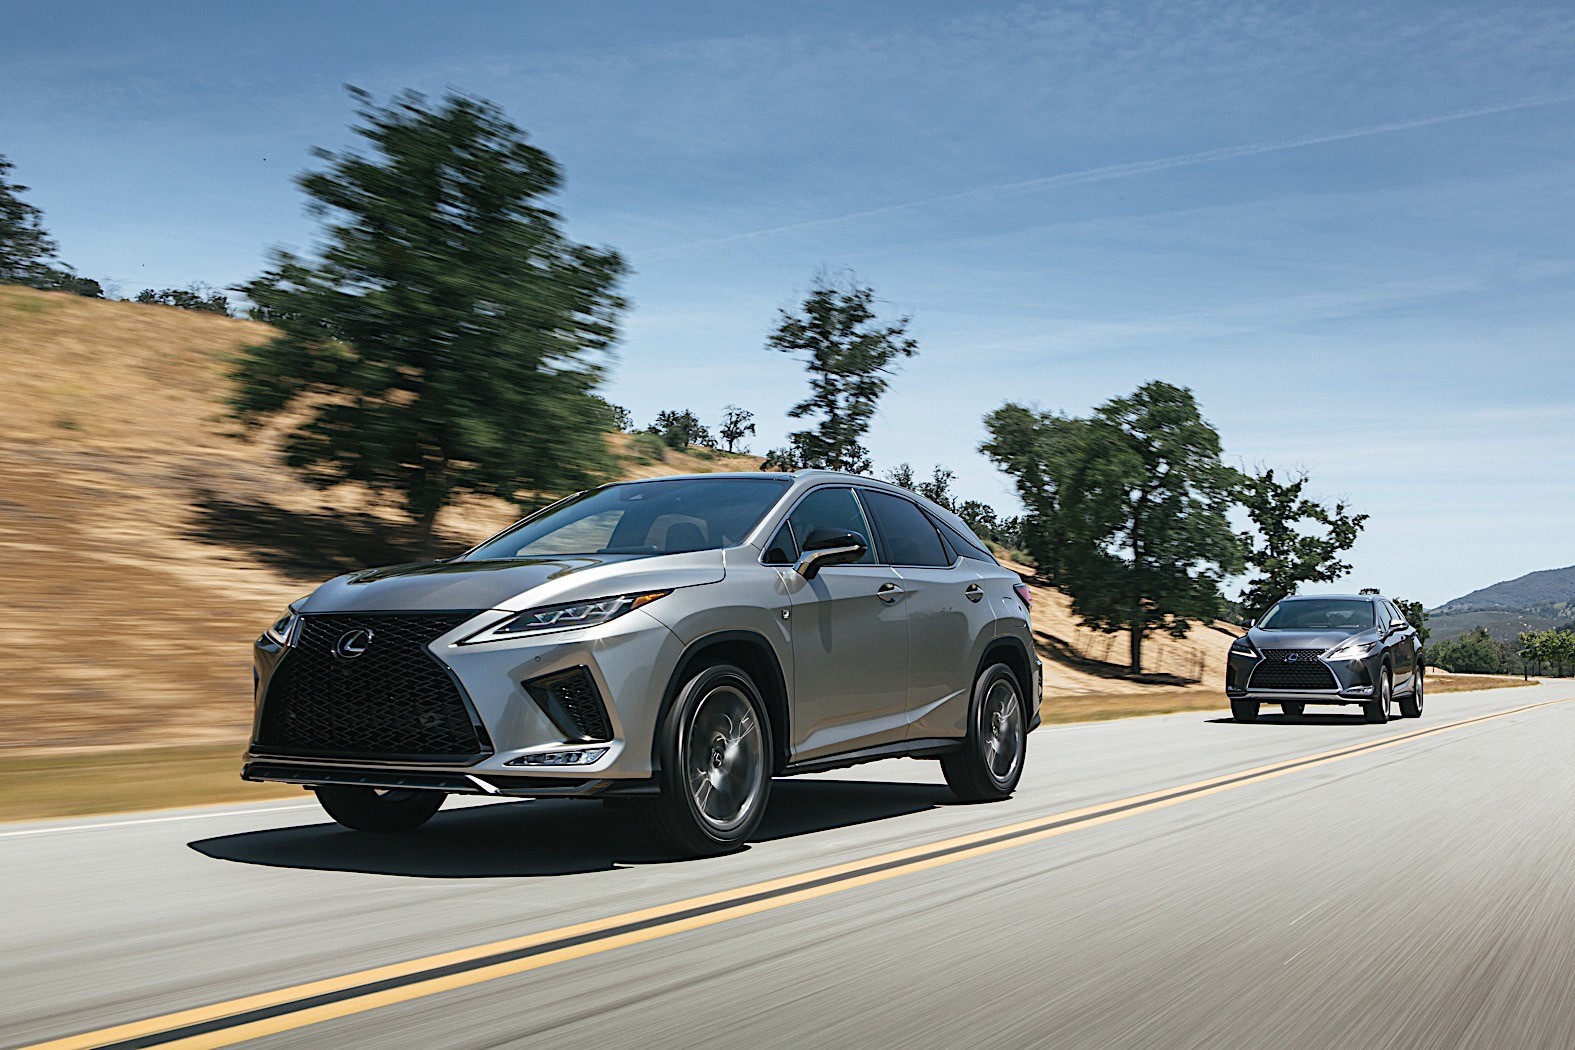 2020 lexus rx breaks cover with android auto for the first time_7